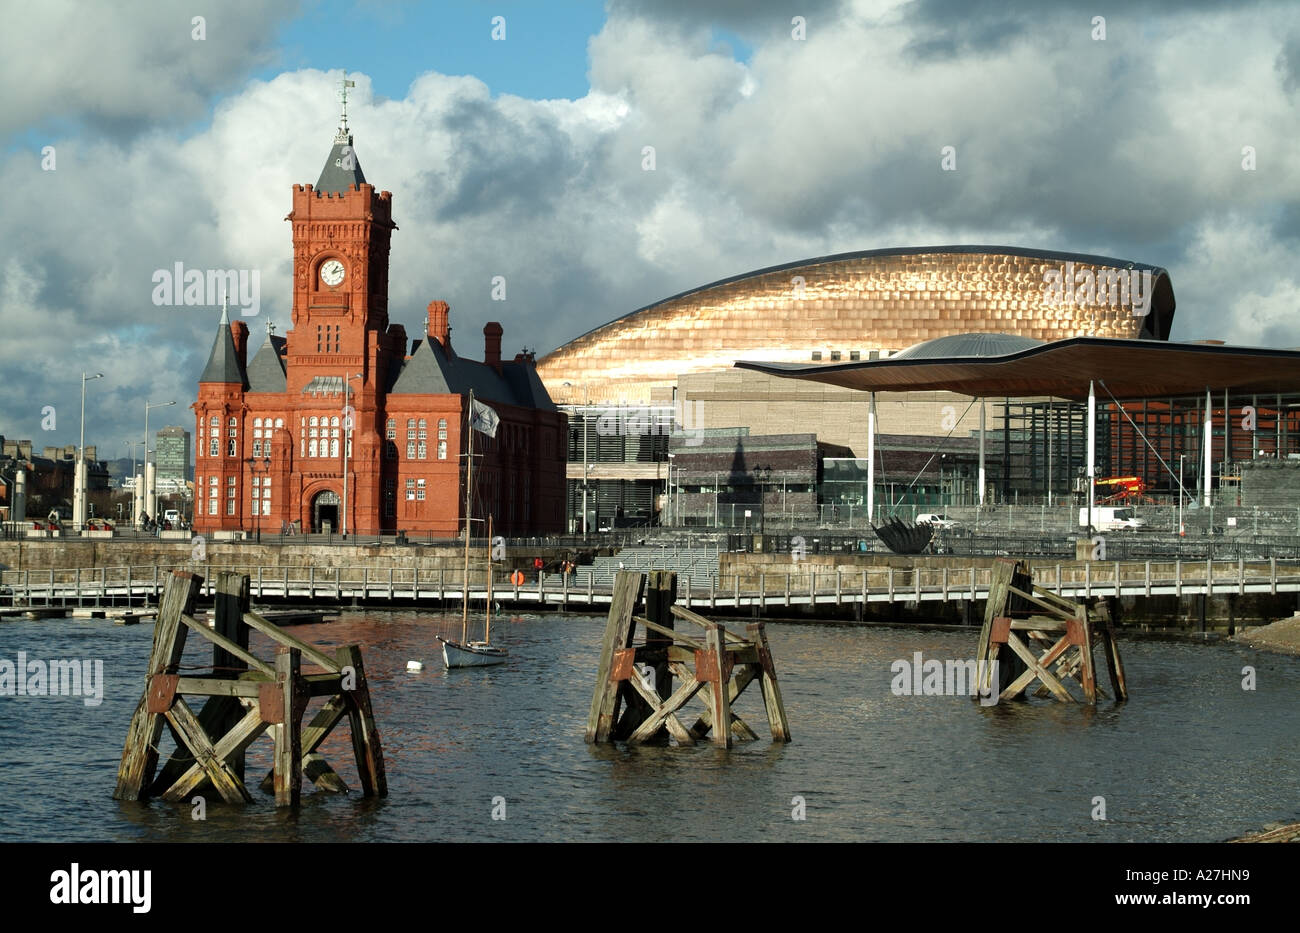 Pierhead Building the Armadillo venue and National Assembly for Wales on Cardiff Bay South Wales United Kingdom UK Stock Photo